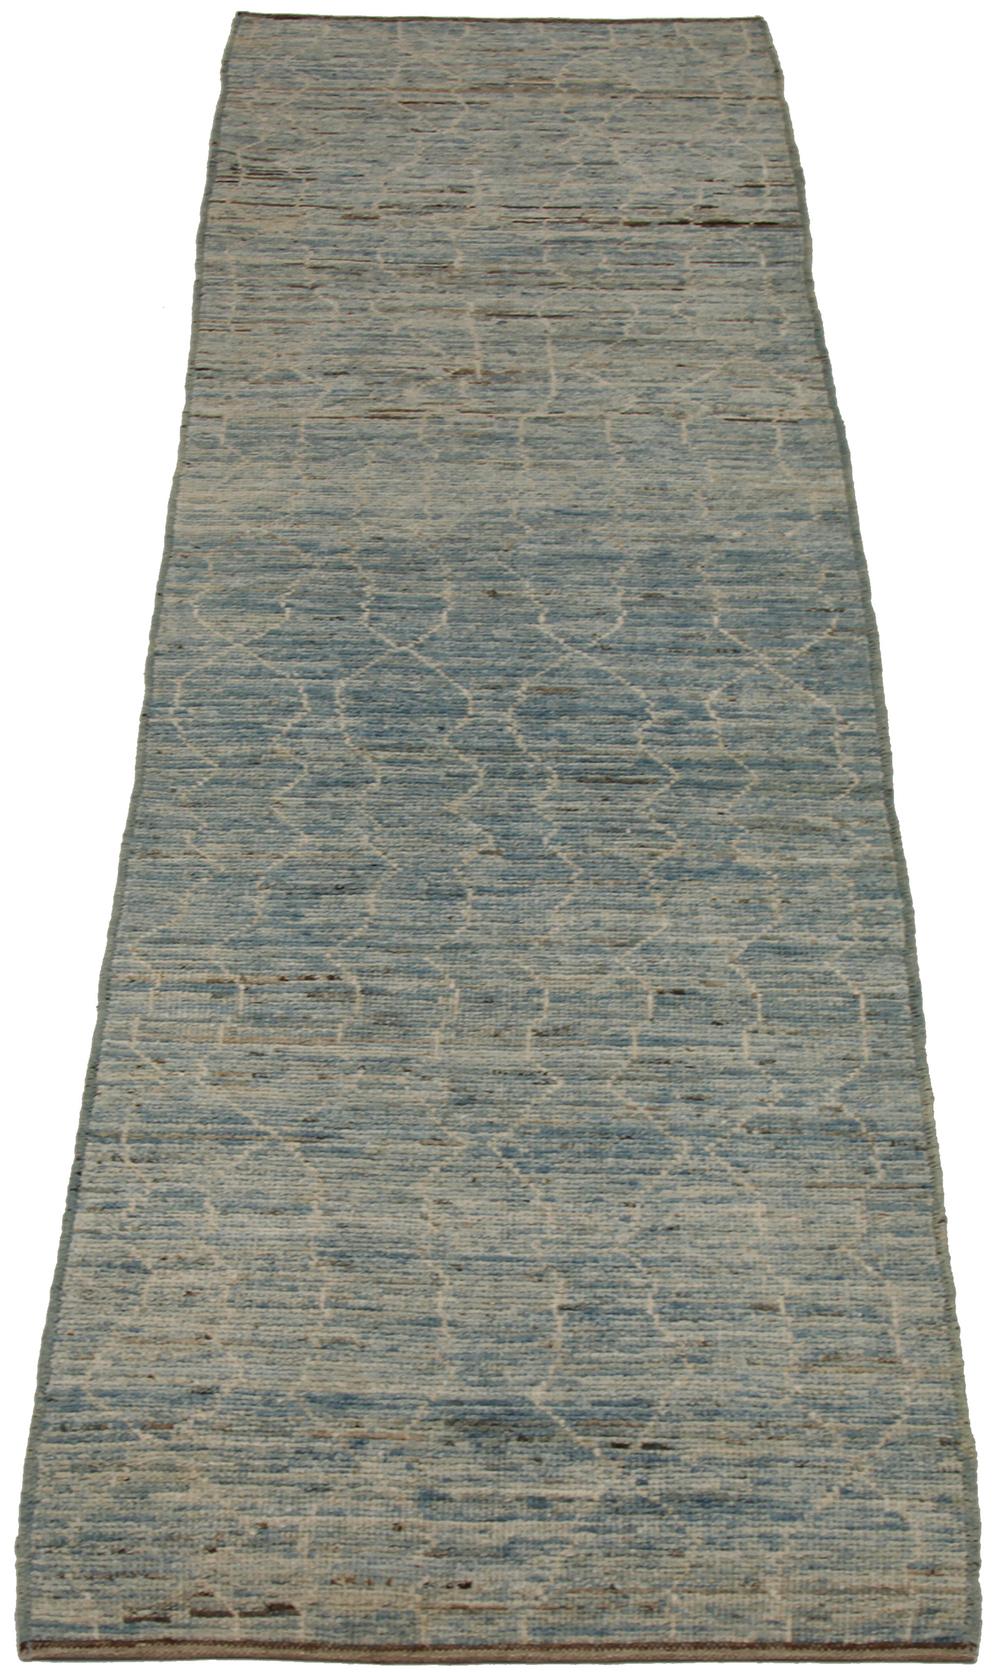 Contemporary Nazmiyal Collection Soft Grey Modern Moroccan Style Rug 2 ft 9 in x 11 ft 3 in